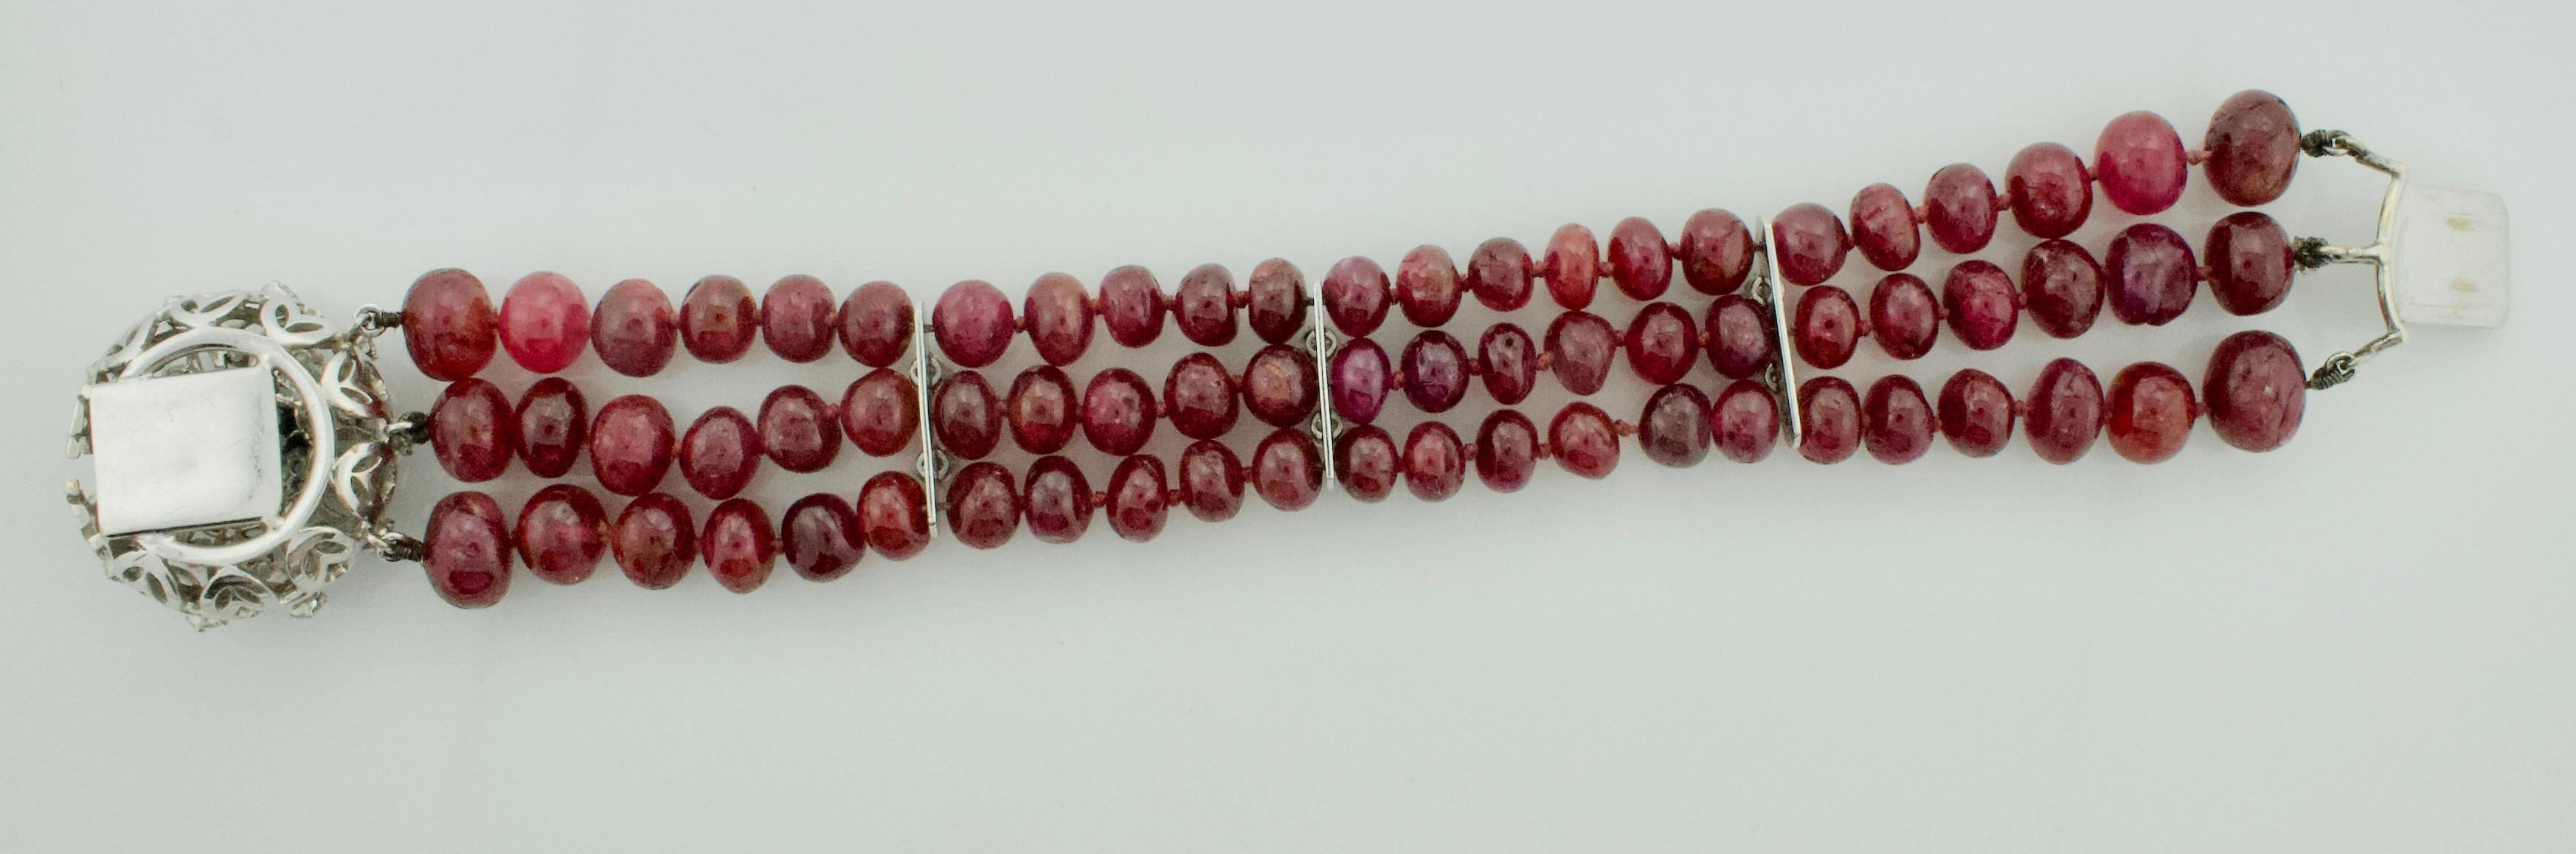 225 Carats Ruby Bead and Diamond Bracelet in White Gold Circa 1950's For Sale 2